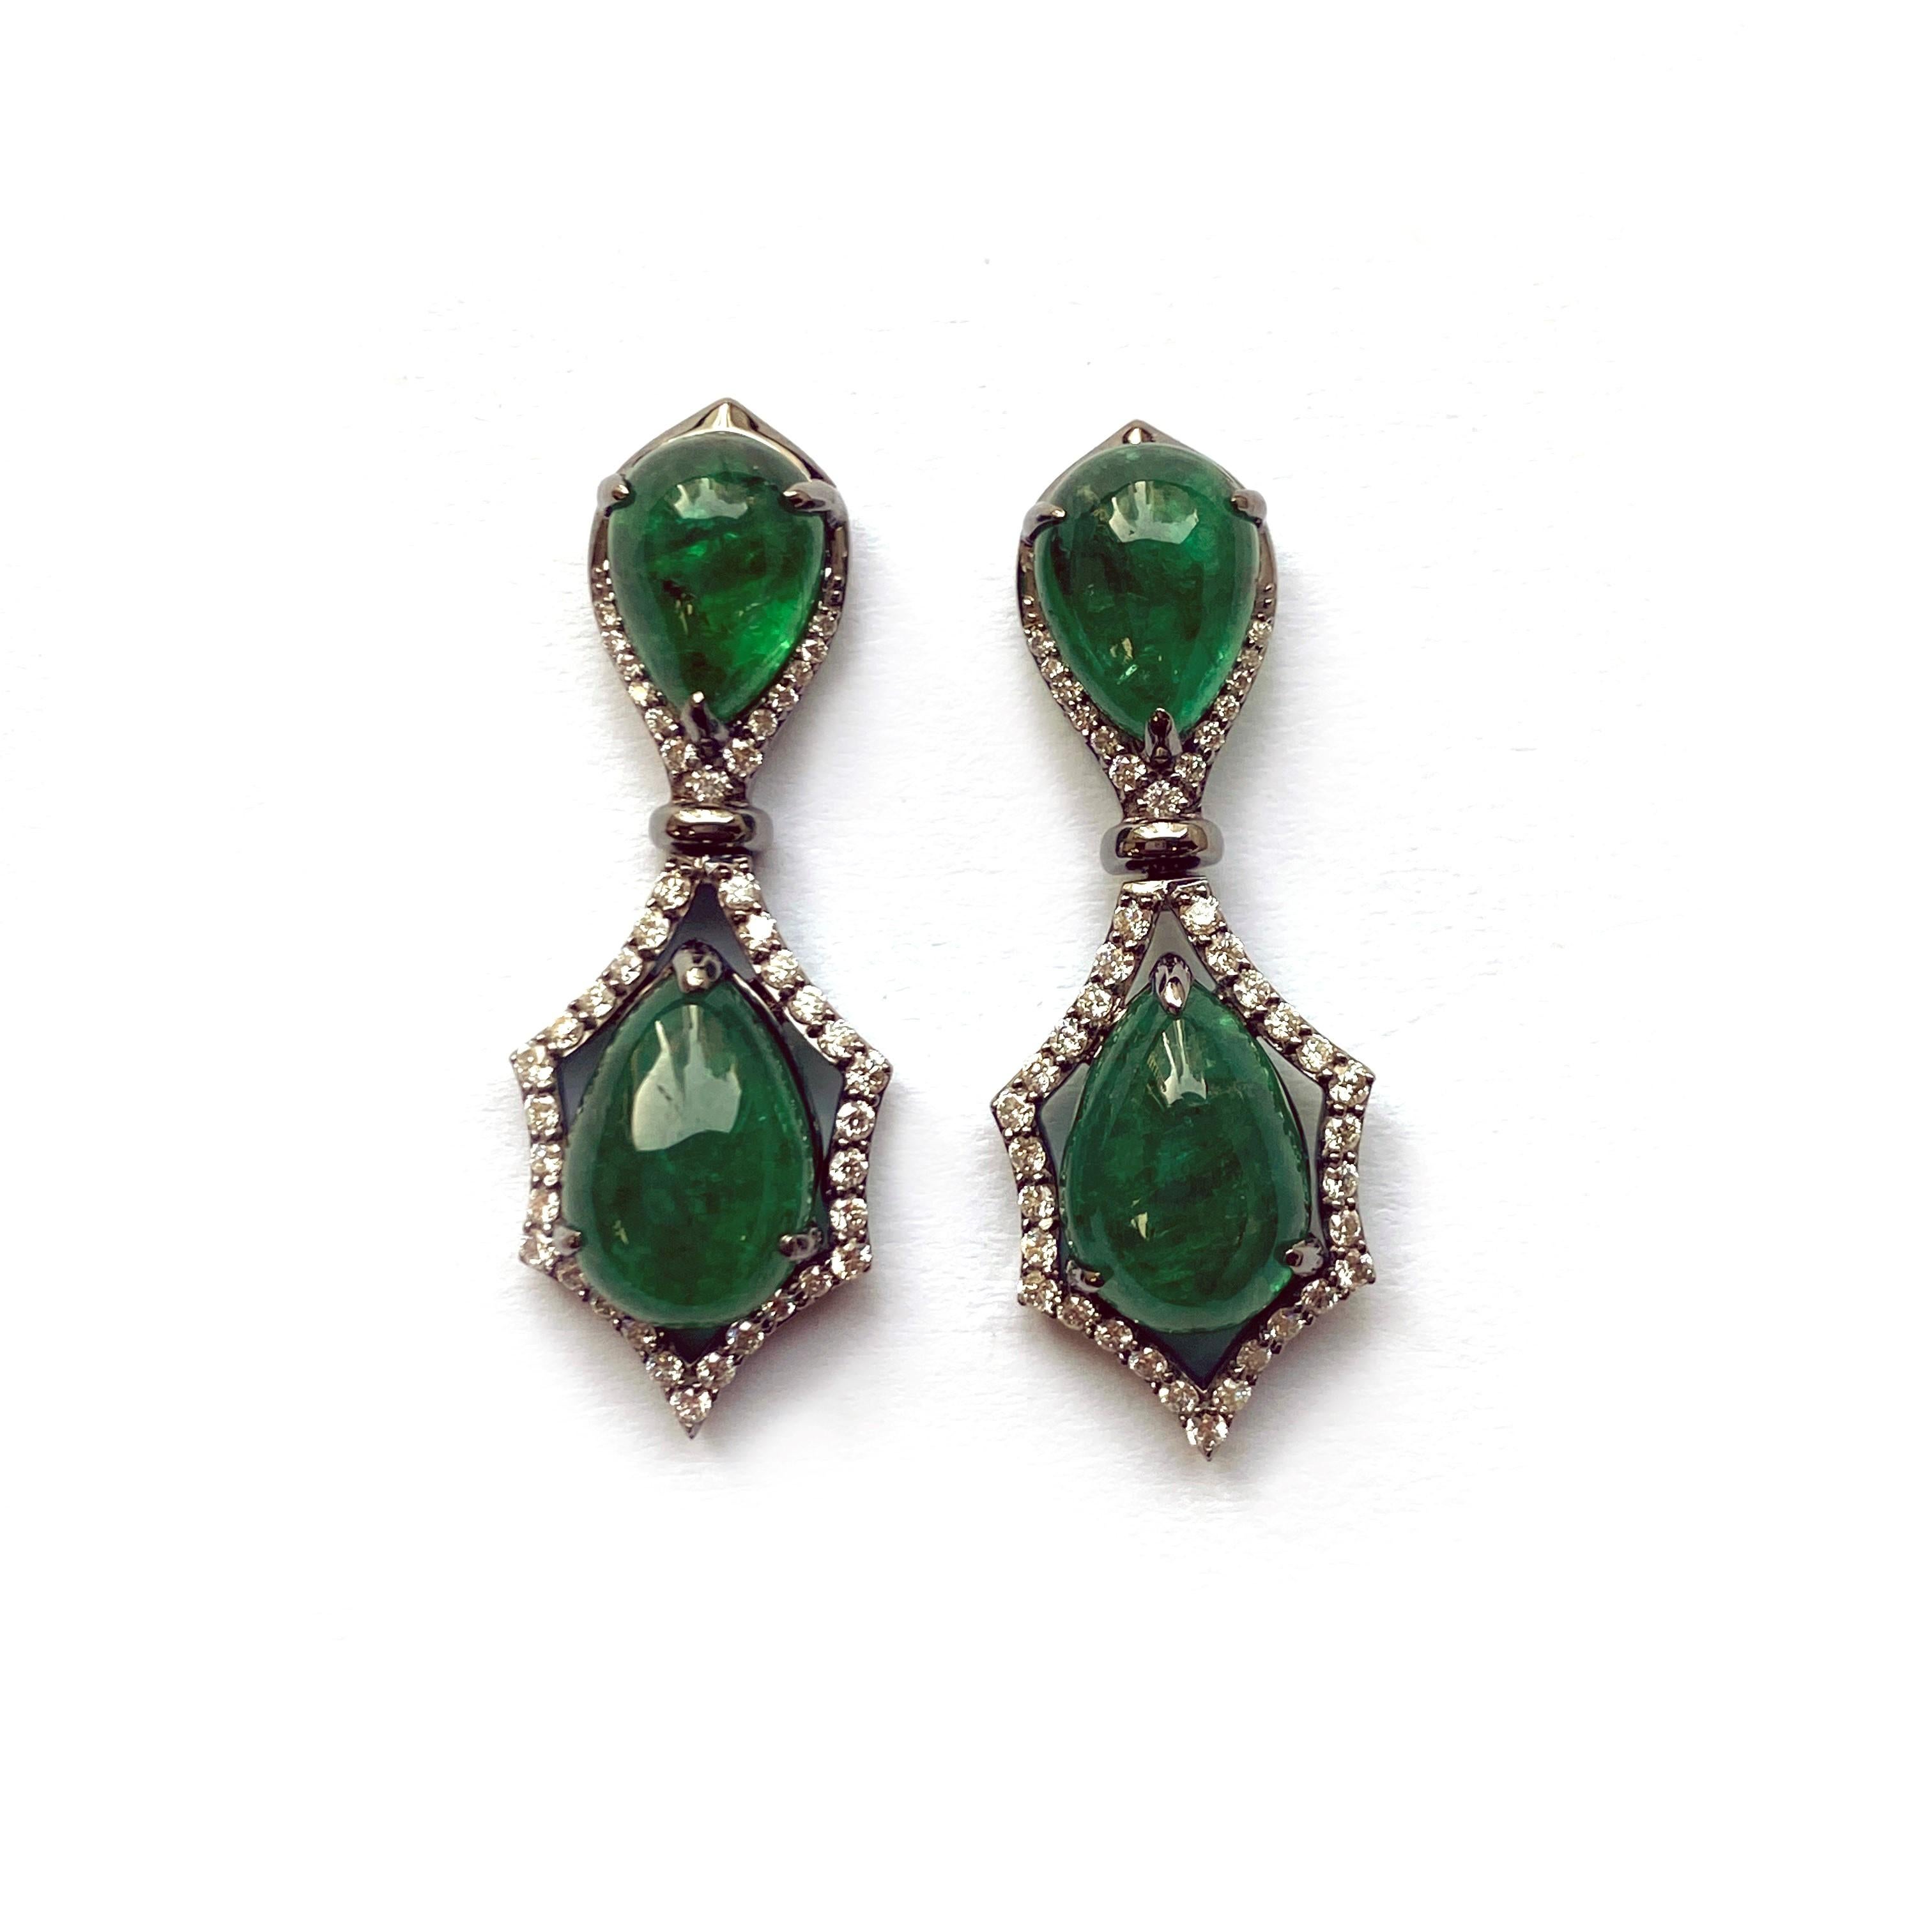 ‘Limited-Edition’ Pear Cab Emerald Earrings with Diamonds in 18K White Gold. The Emeralds makes these earrings very special, and a great piece to have in your personal collection.

* Gemstone: 100% Earth Mined 
* Approx. gemstone Weight: 13.00